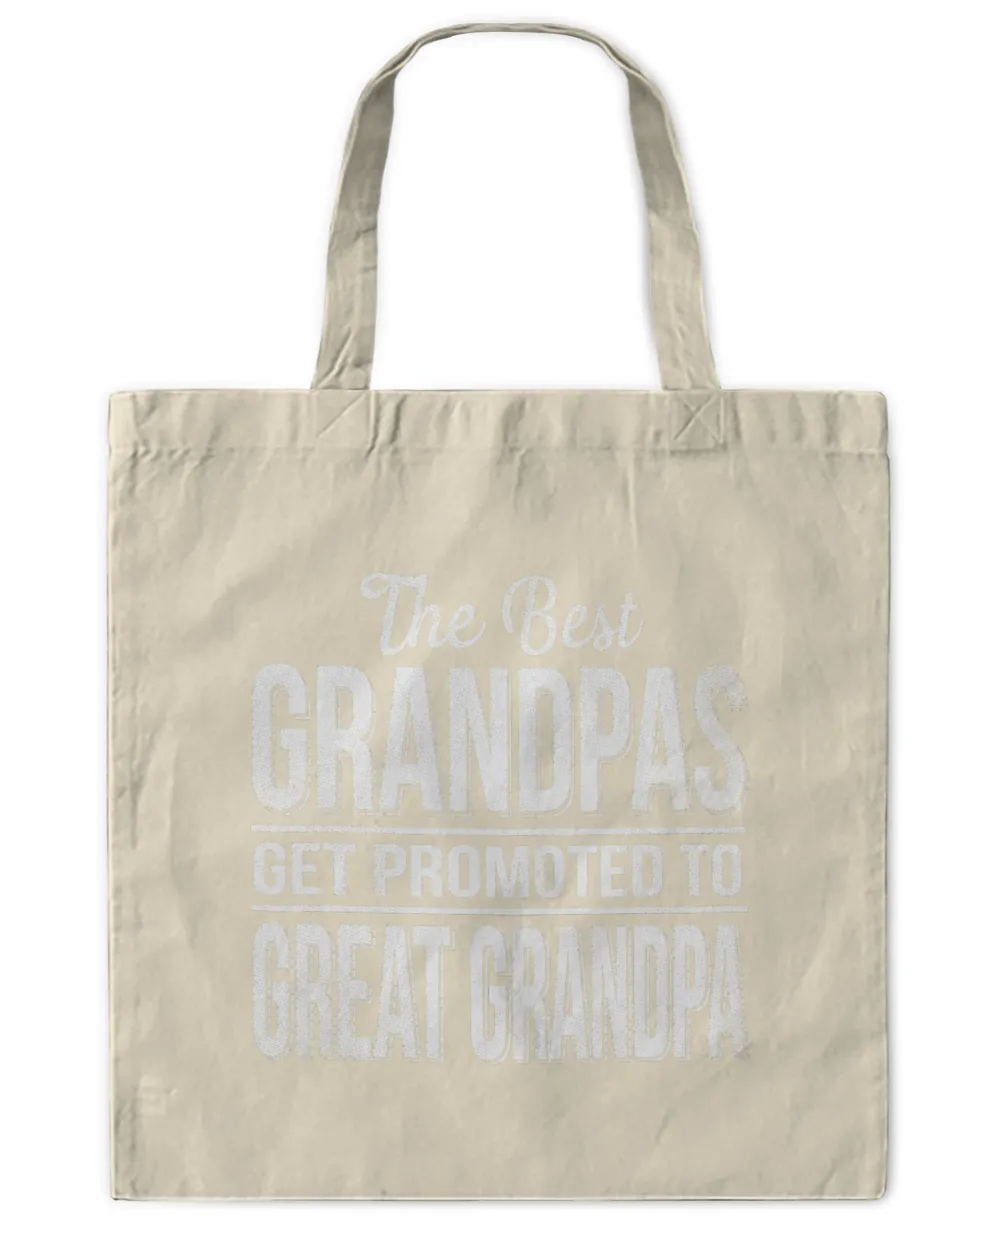 The only best grandpas get promoted to great grandpa